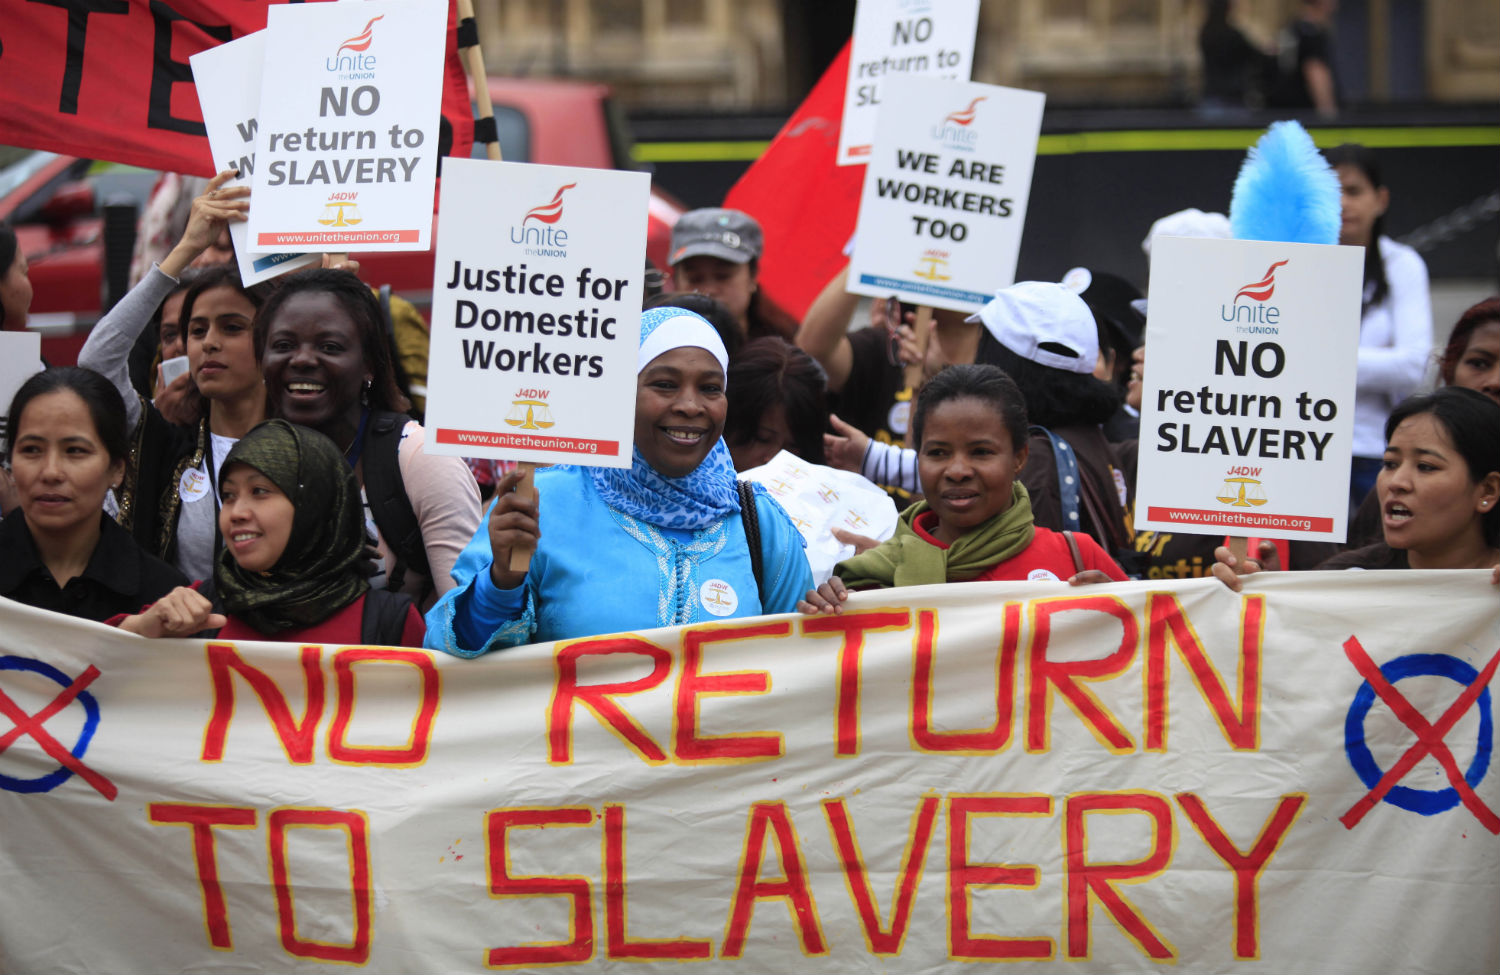 How UK Law Ties Immigrant Domestic Workers to Their Abusive Employers